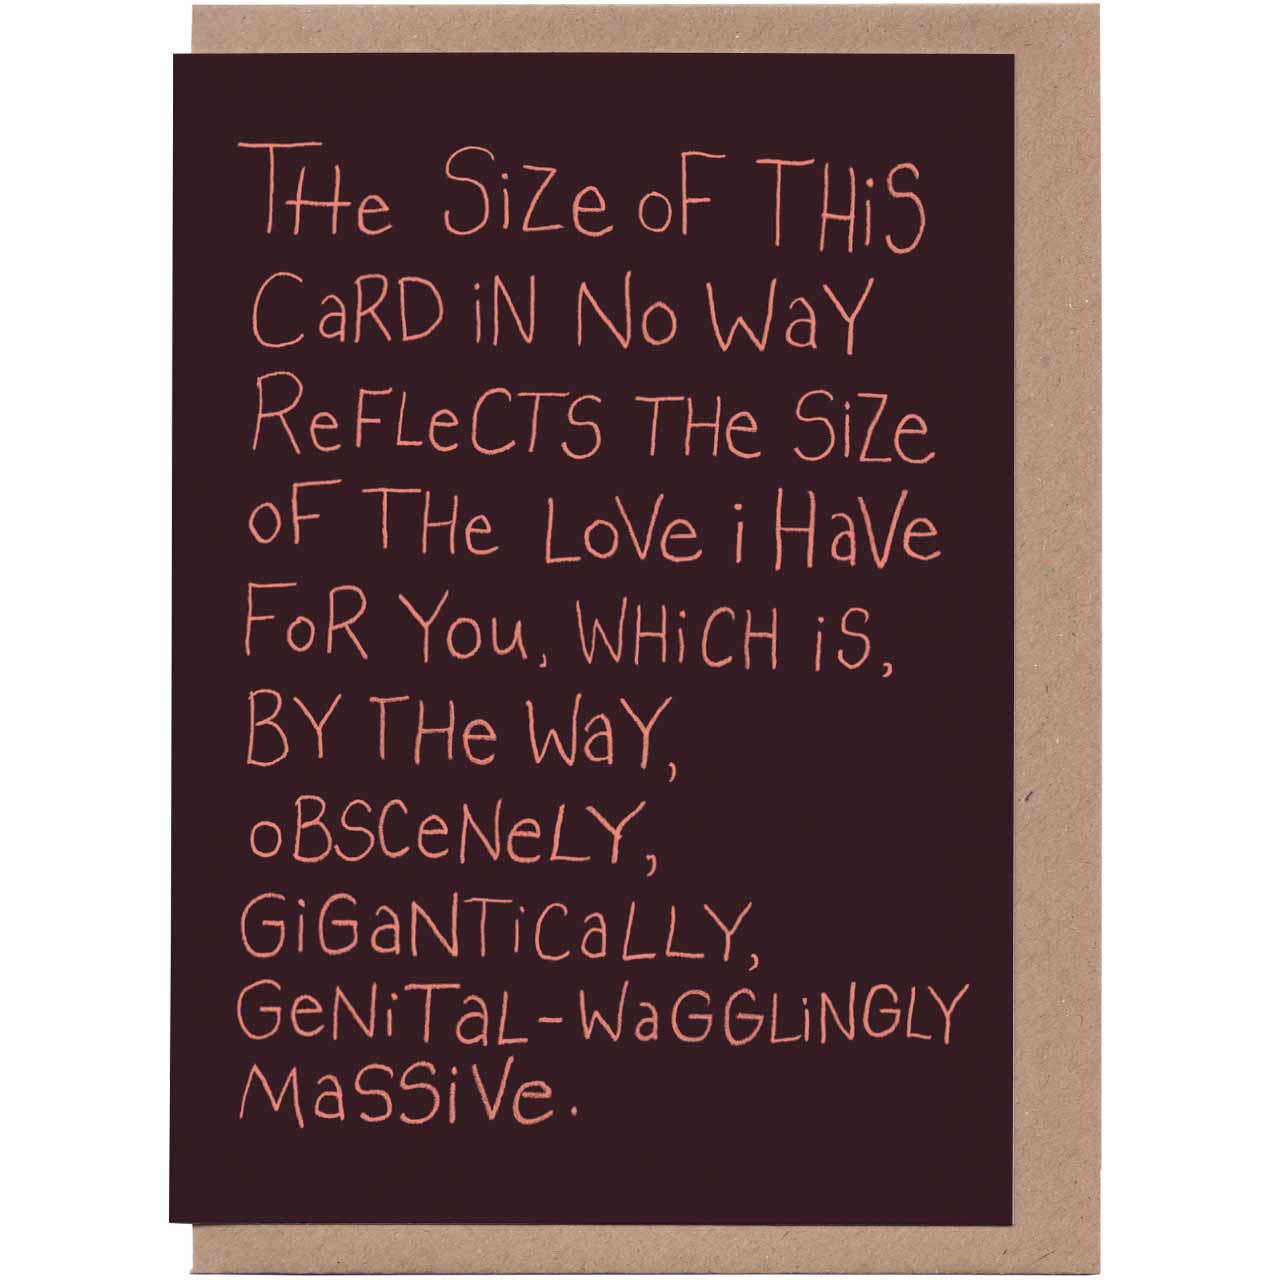 Genital-Wagglingly Massive Greeting Card